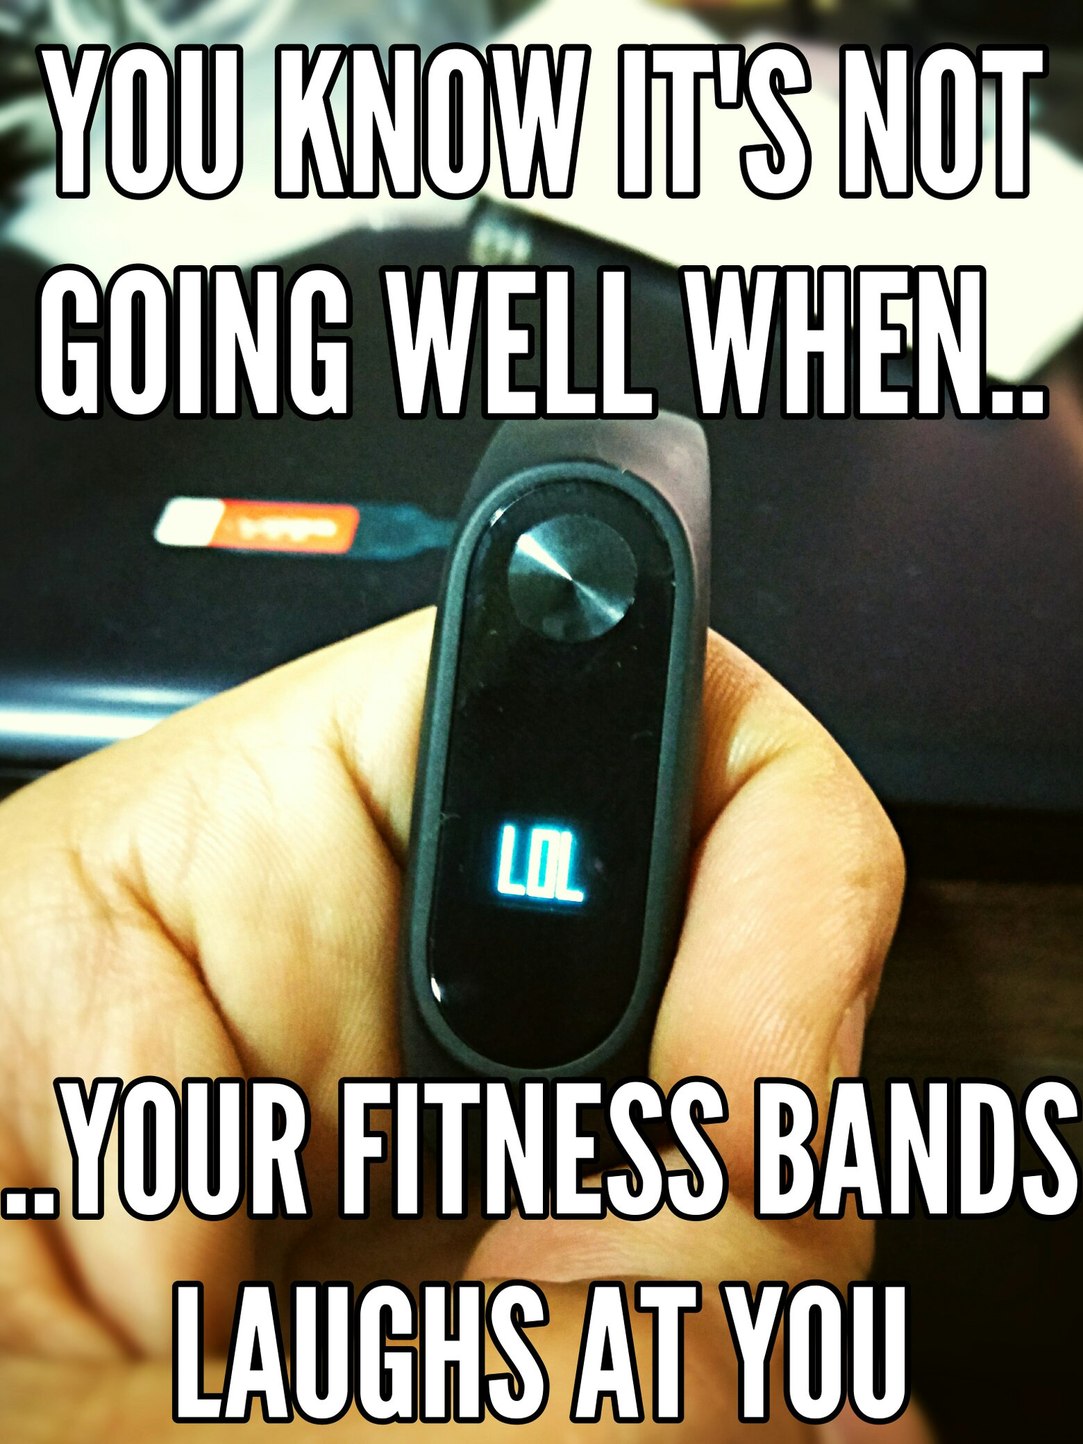 What's your step count? - meme